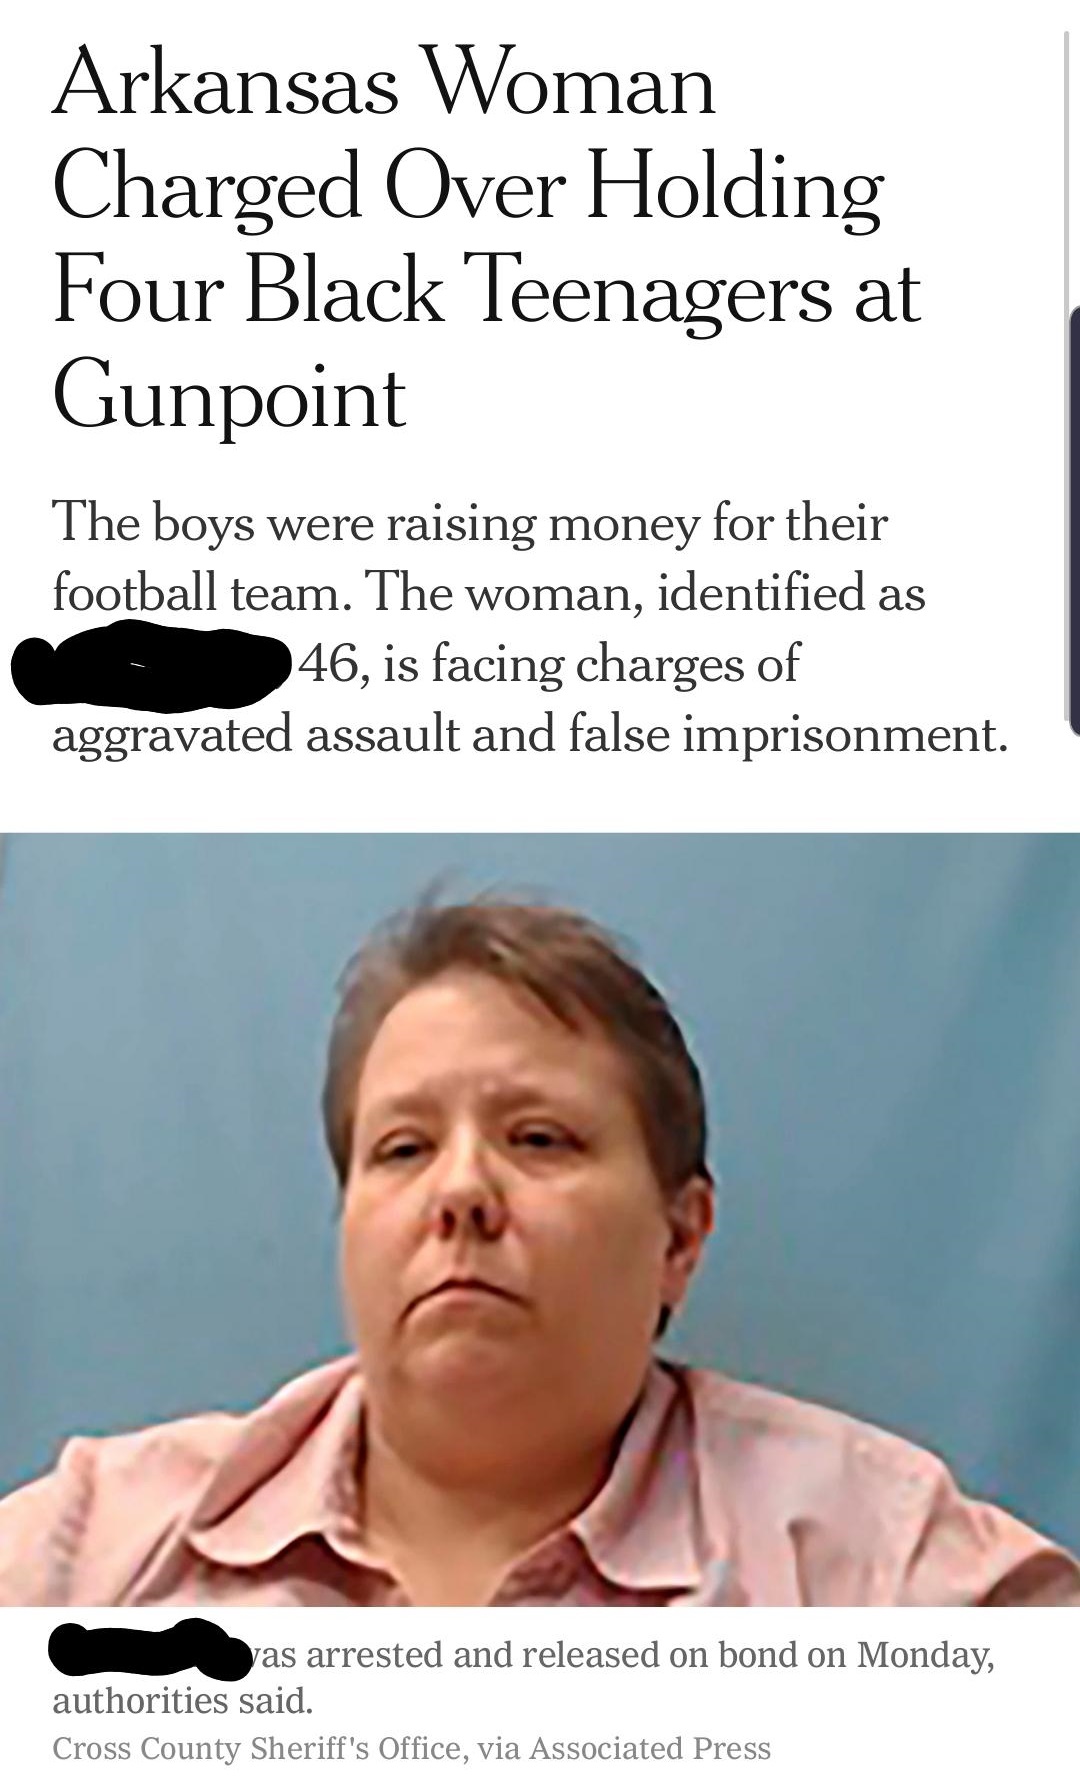 human behavior - Arkansas Woman Charged Over Holding Four Black Teenagers at Gunpoint The boys were raising money for their football team. The woman, identified as 46, is facing charges of aggravated assault and false imprisonment. as arrested and release